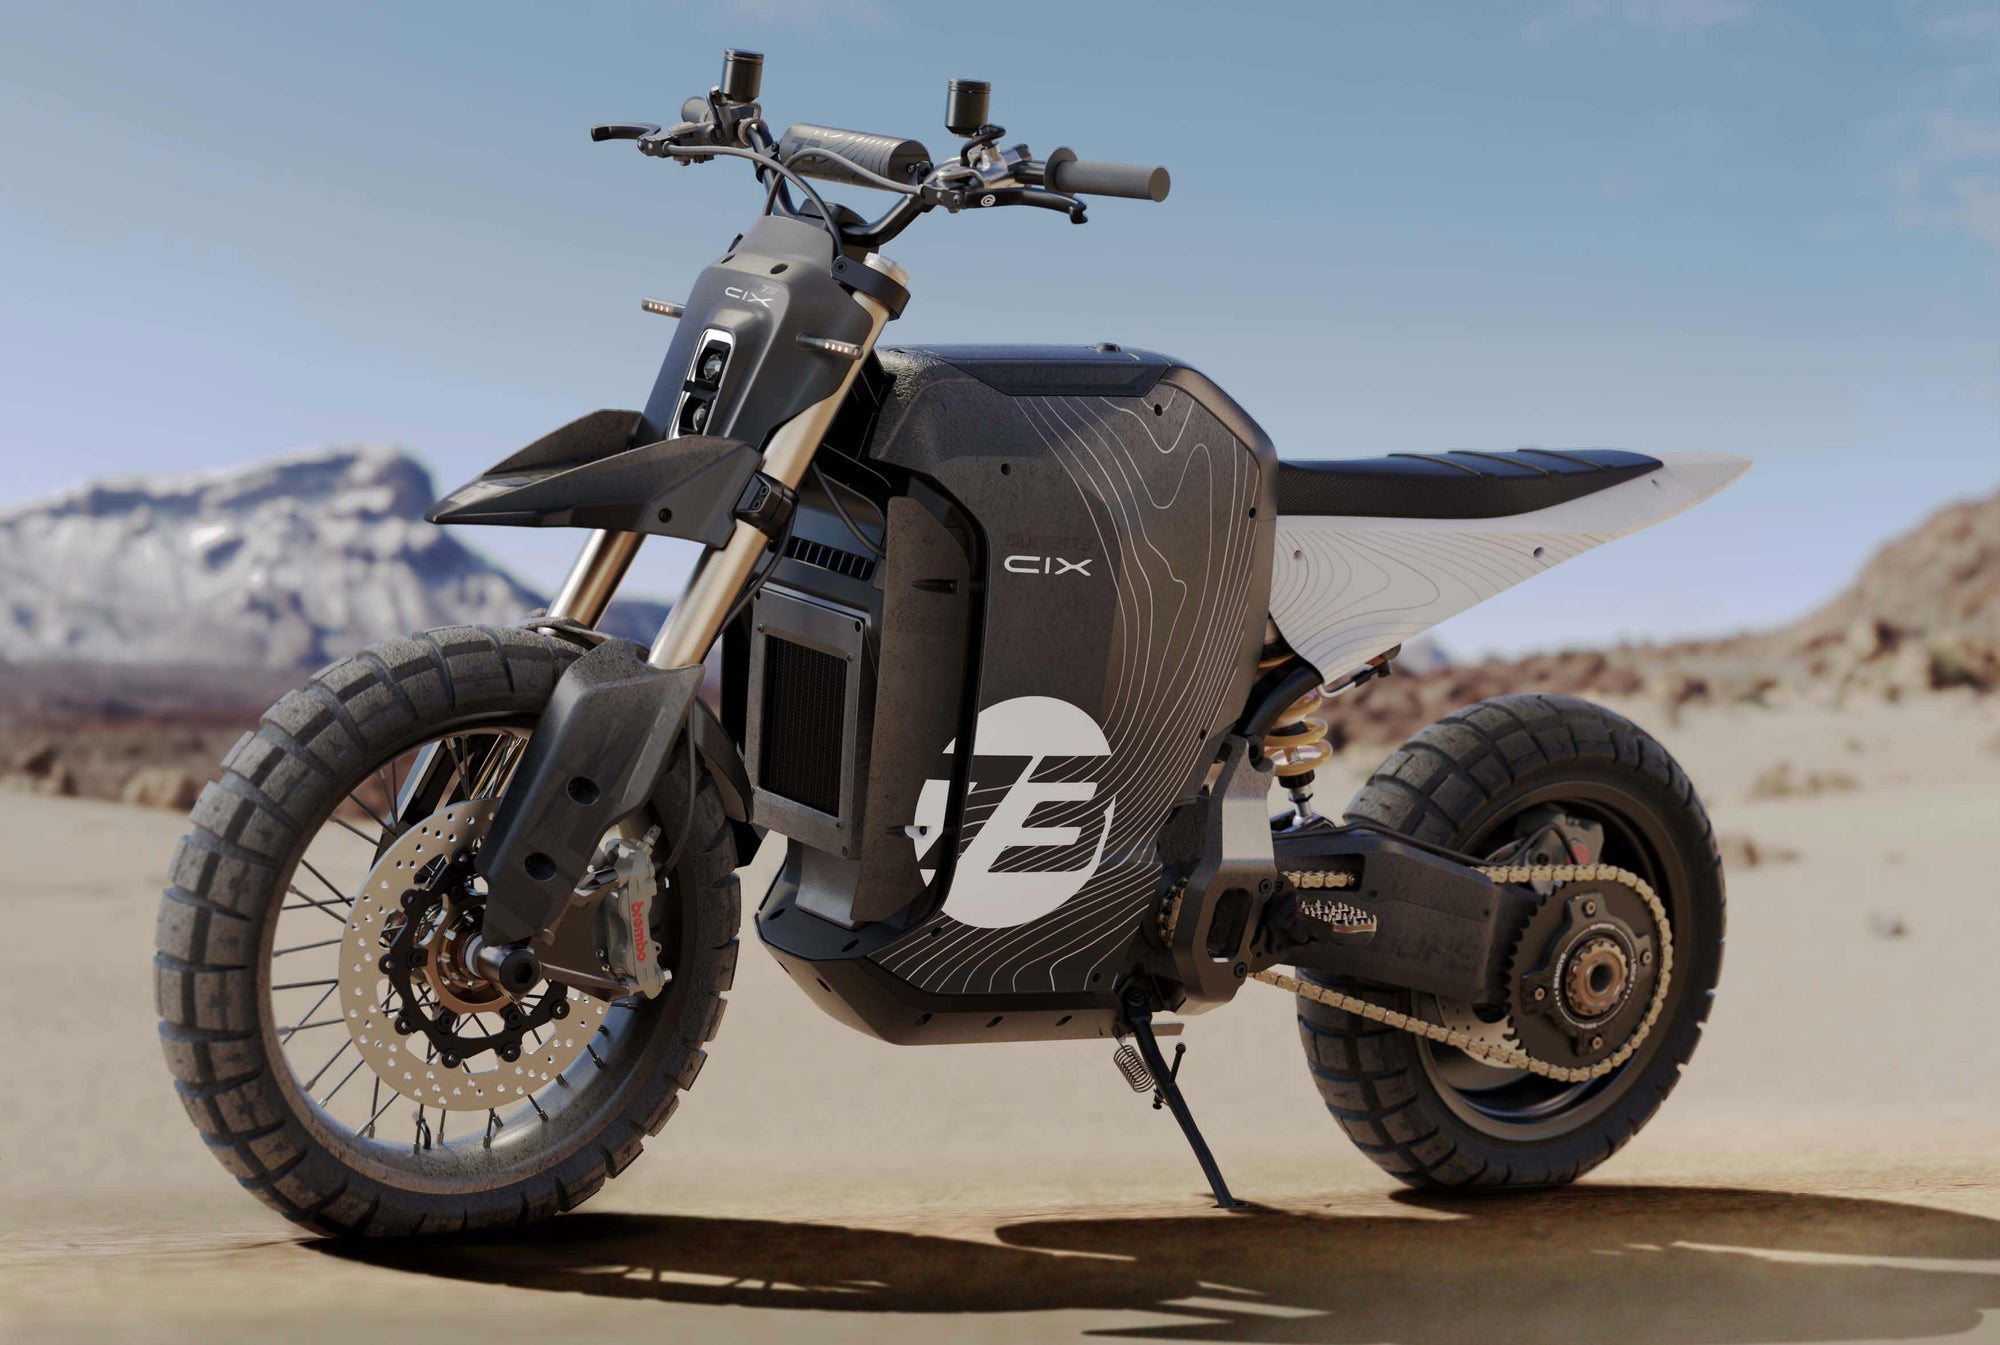 Lifestyle image with side view of the El Jefe Scrambler Dual Sport C1X bike